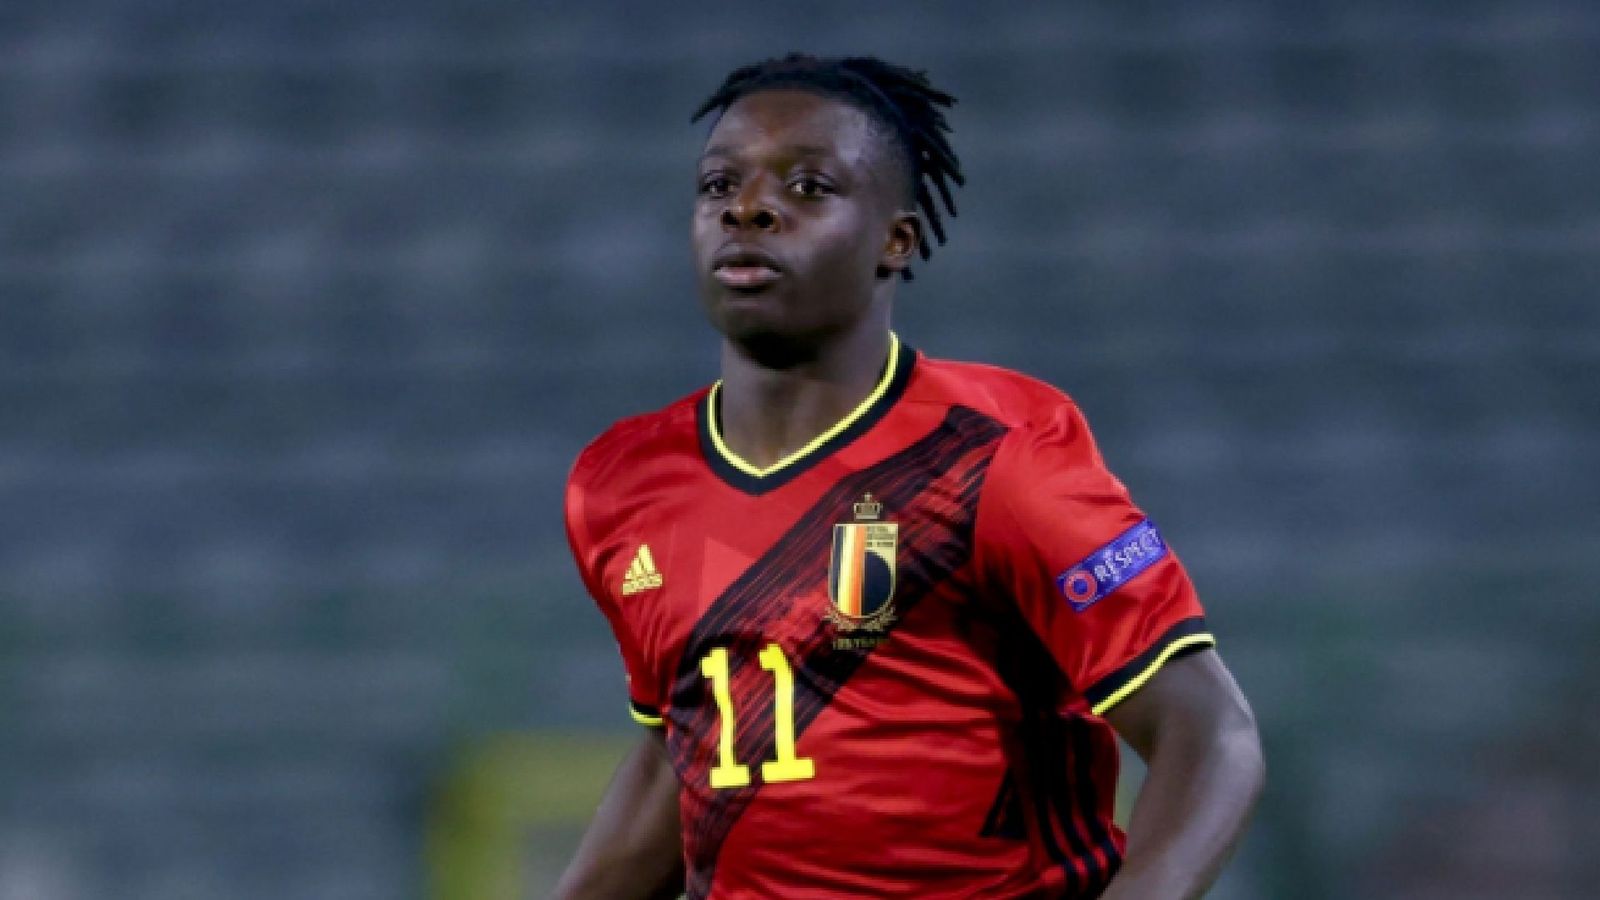 Future Star Spotlight Belgian Sensation Doku Is One Of The Most Exciting Teenagers In The Game International Champions Cup